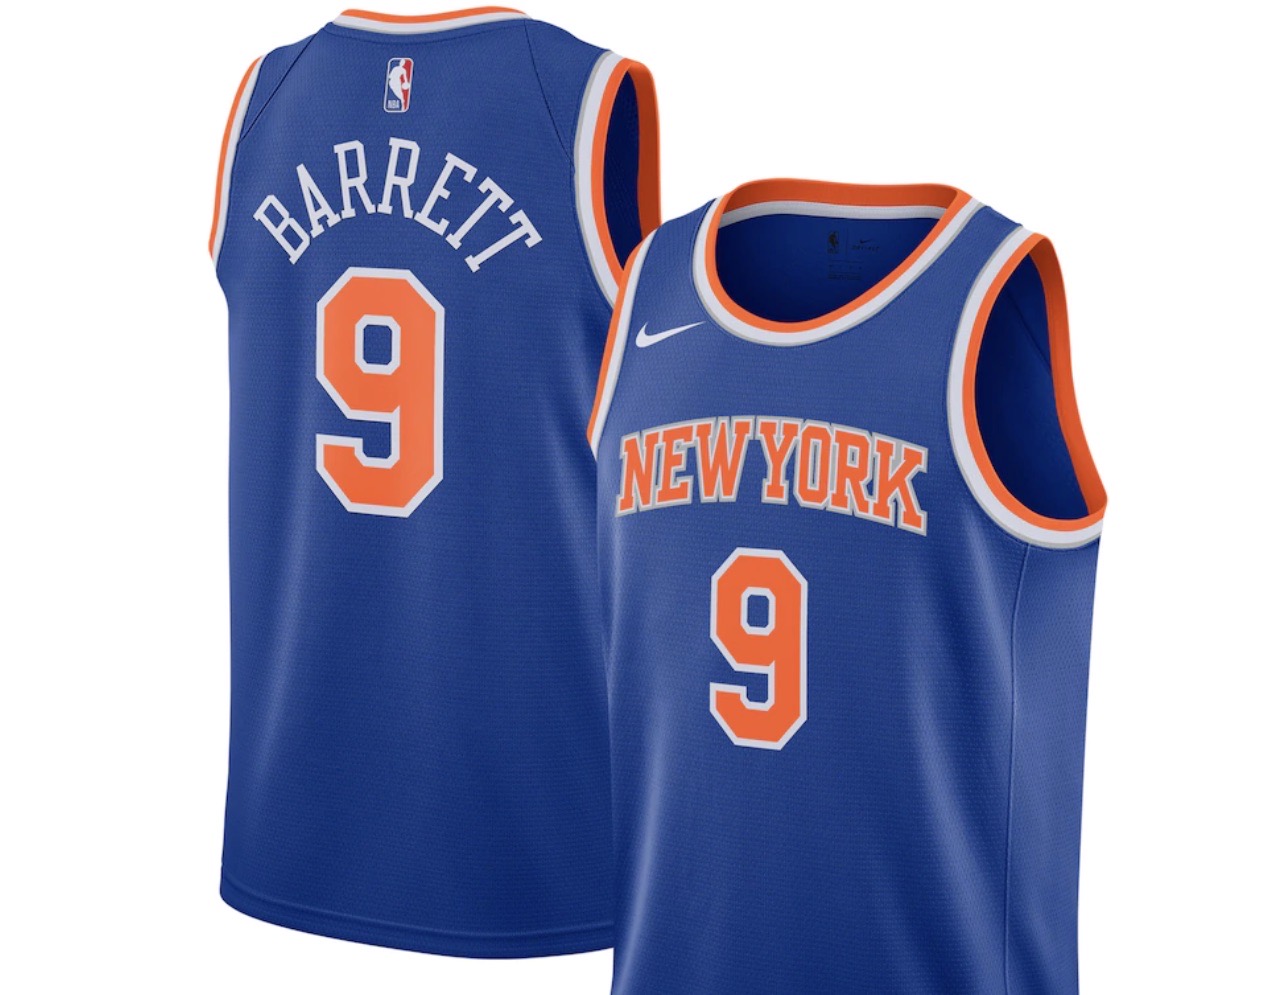 Anthony and Knicks Reach No. 1 in Jersey Sales - The New York Times